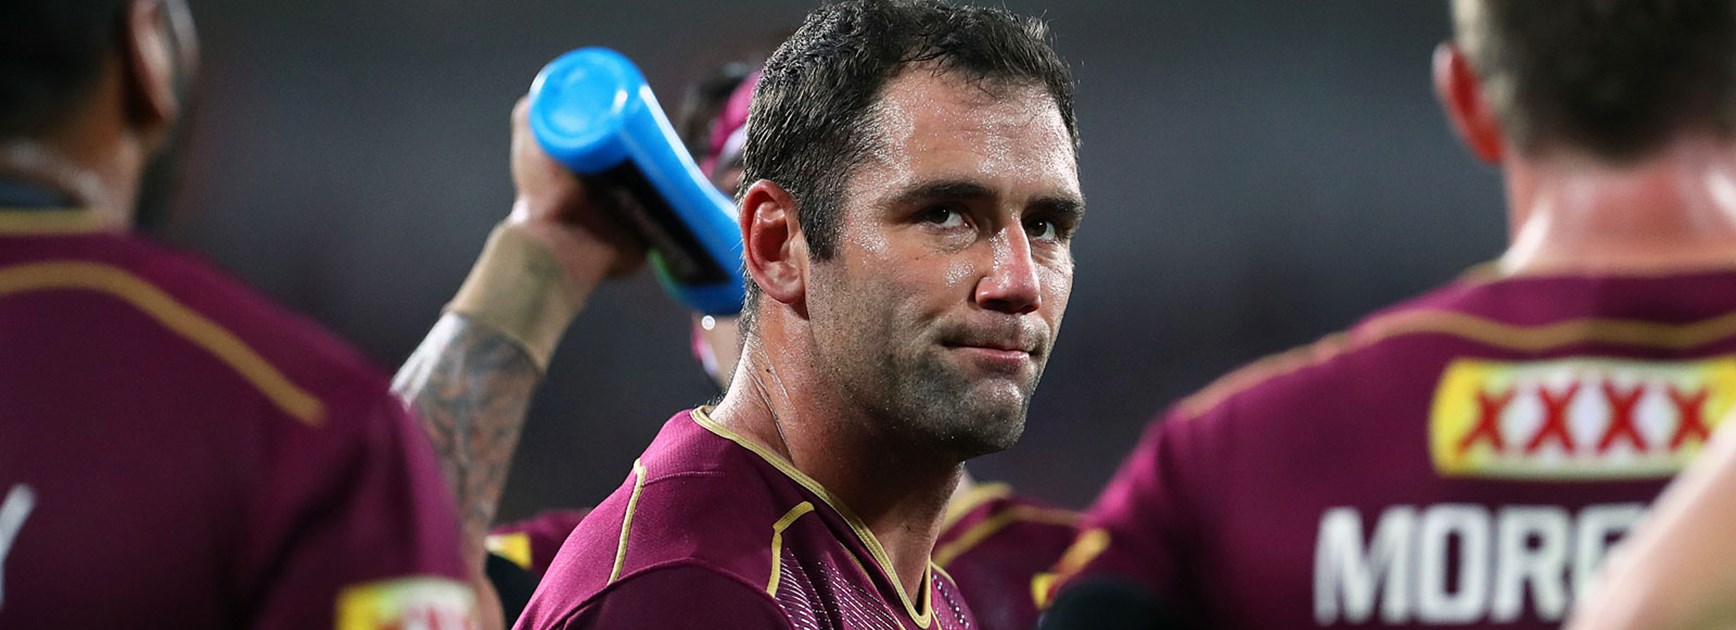 NSW captain Paul Gallen believes Queensland counterpart Cameron Smith is the greatest player he's ever seen.